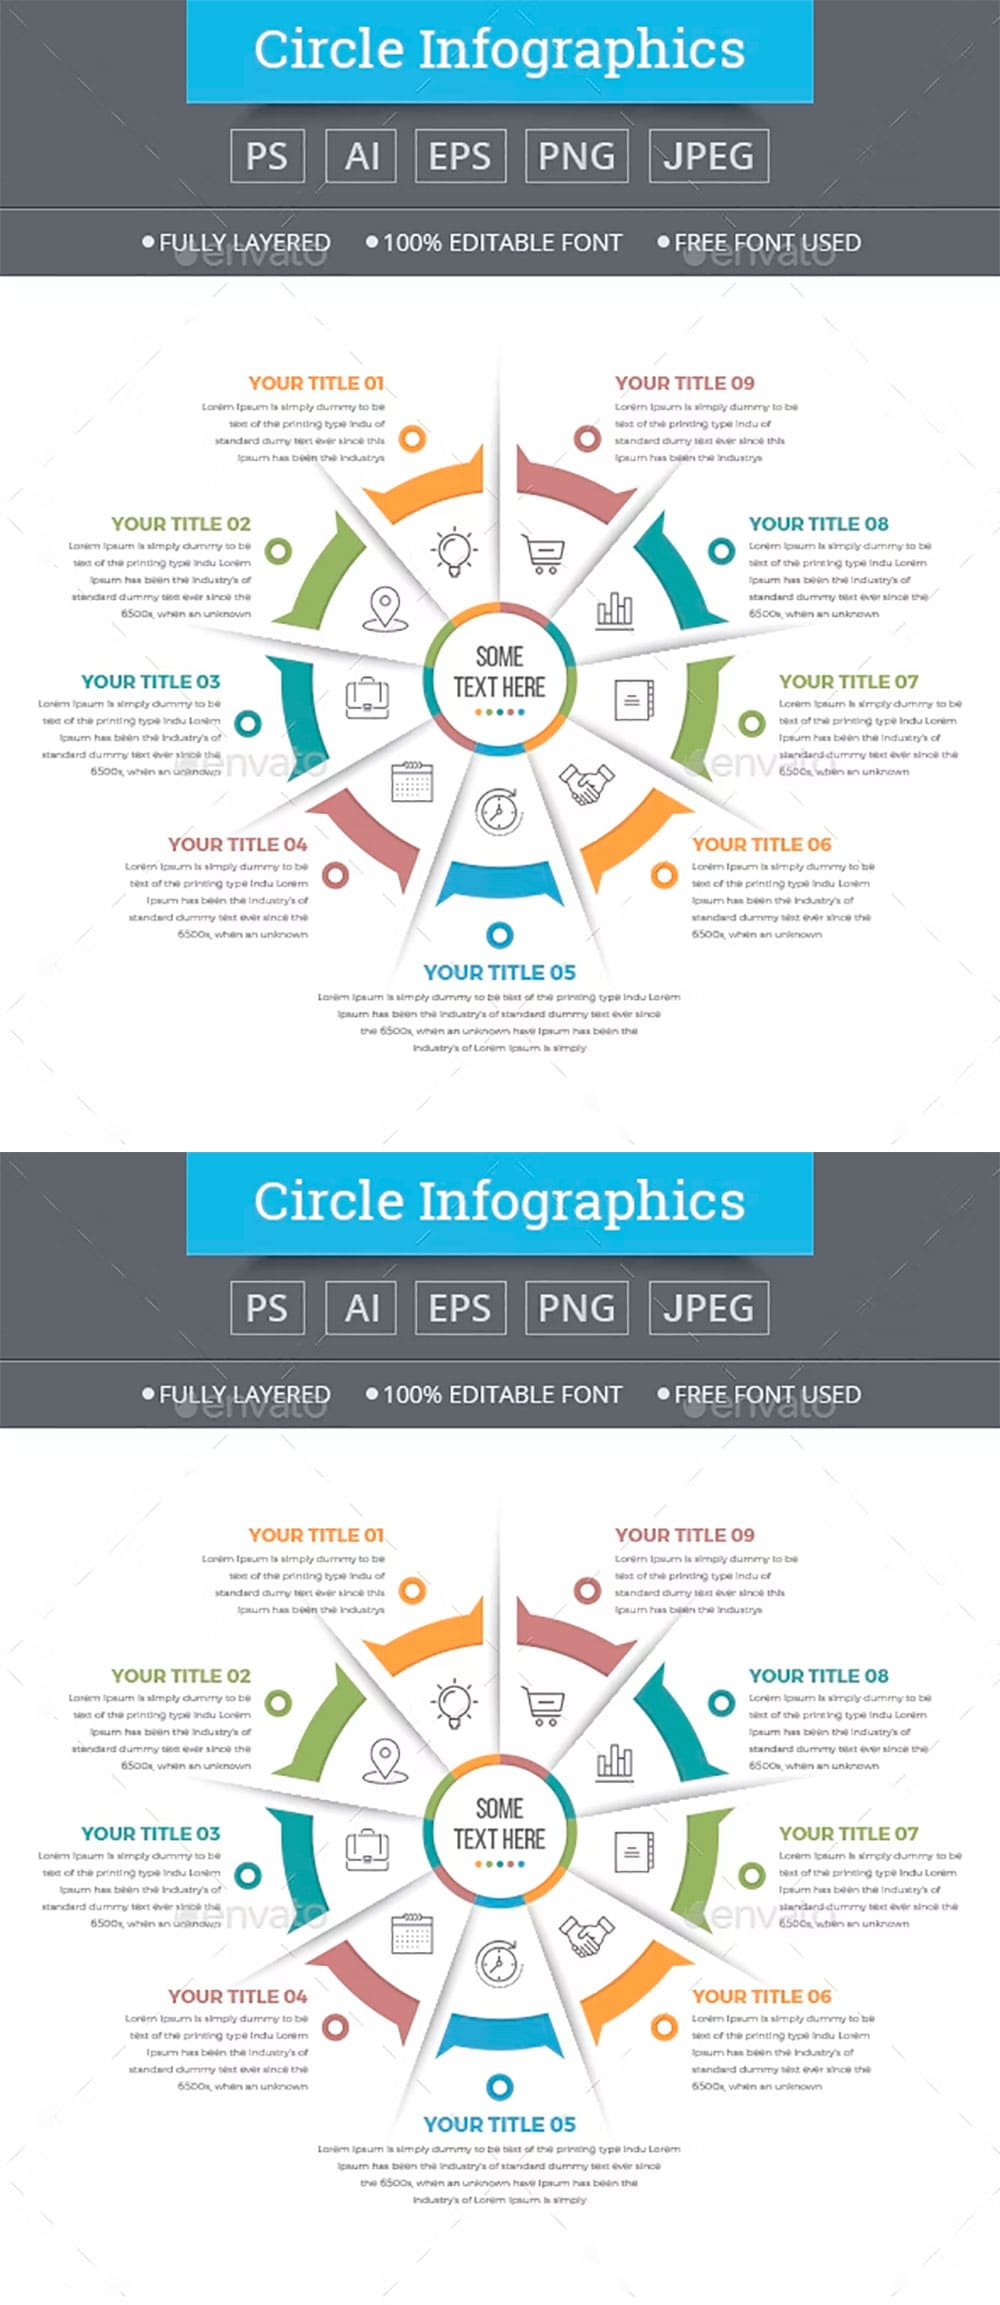 Business circle infographics with 09 steps, picture for pinterest.